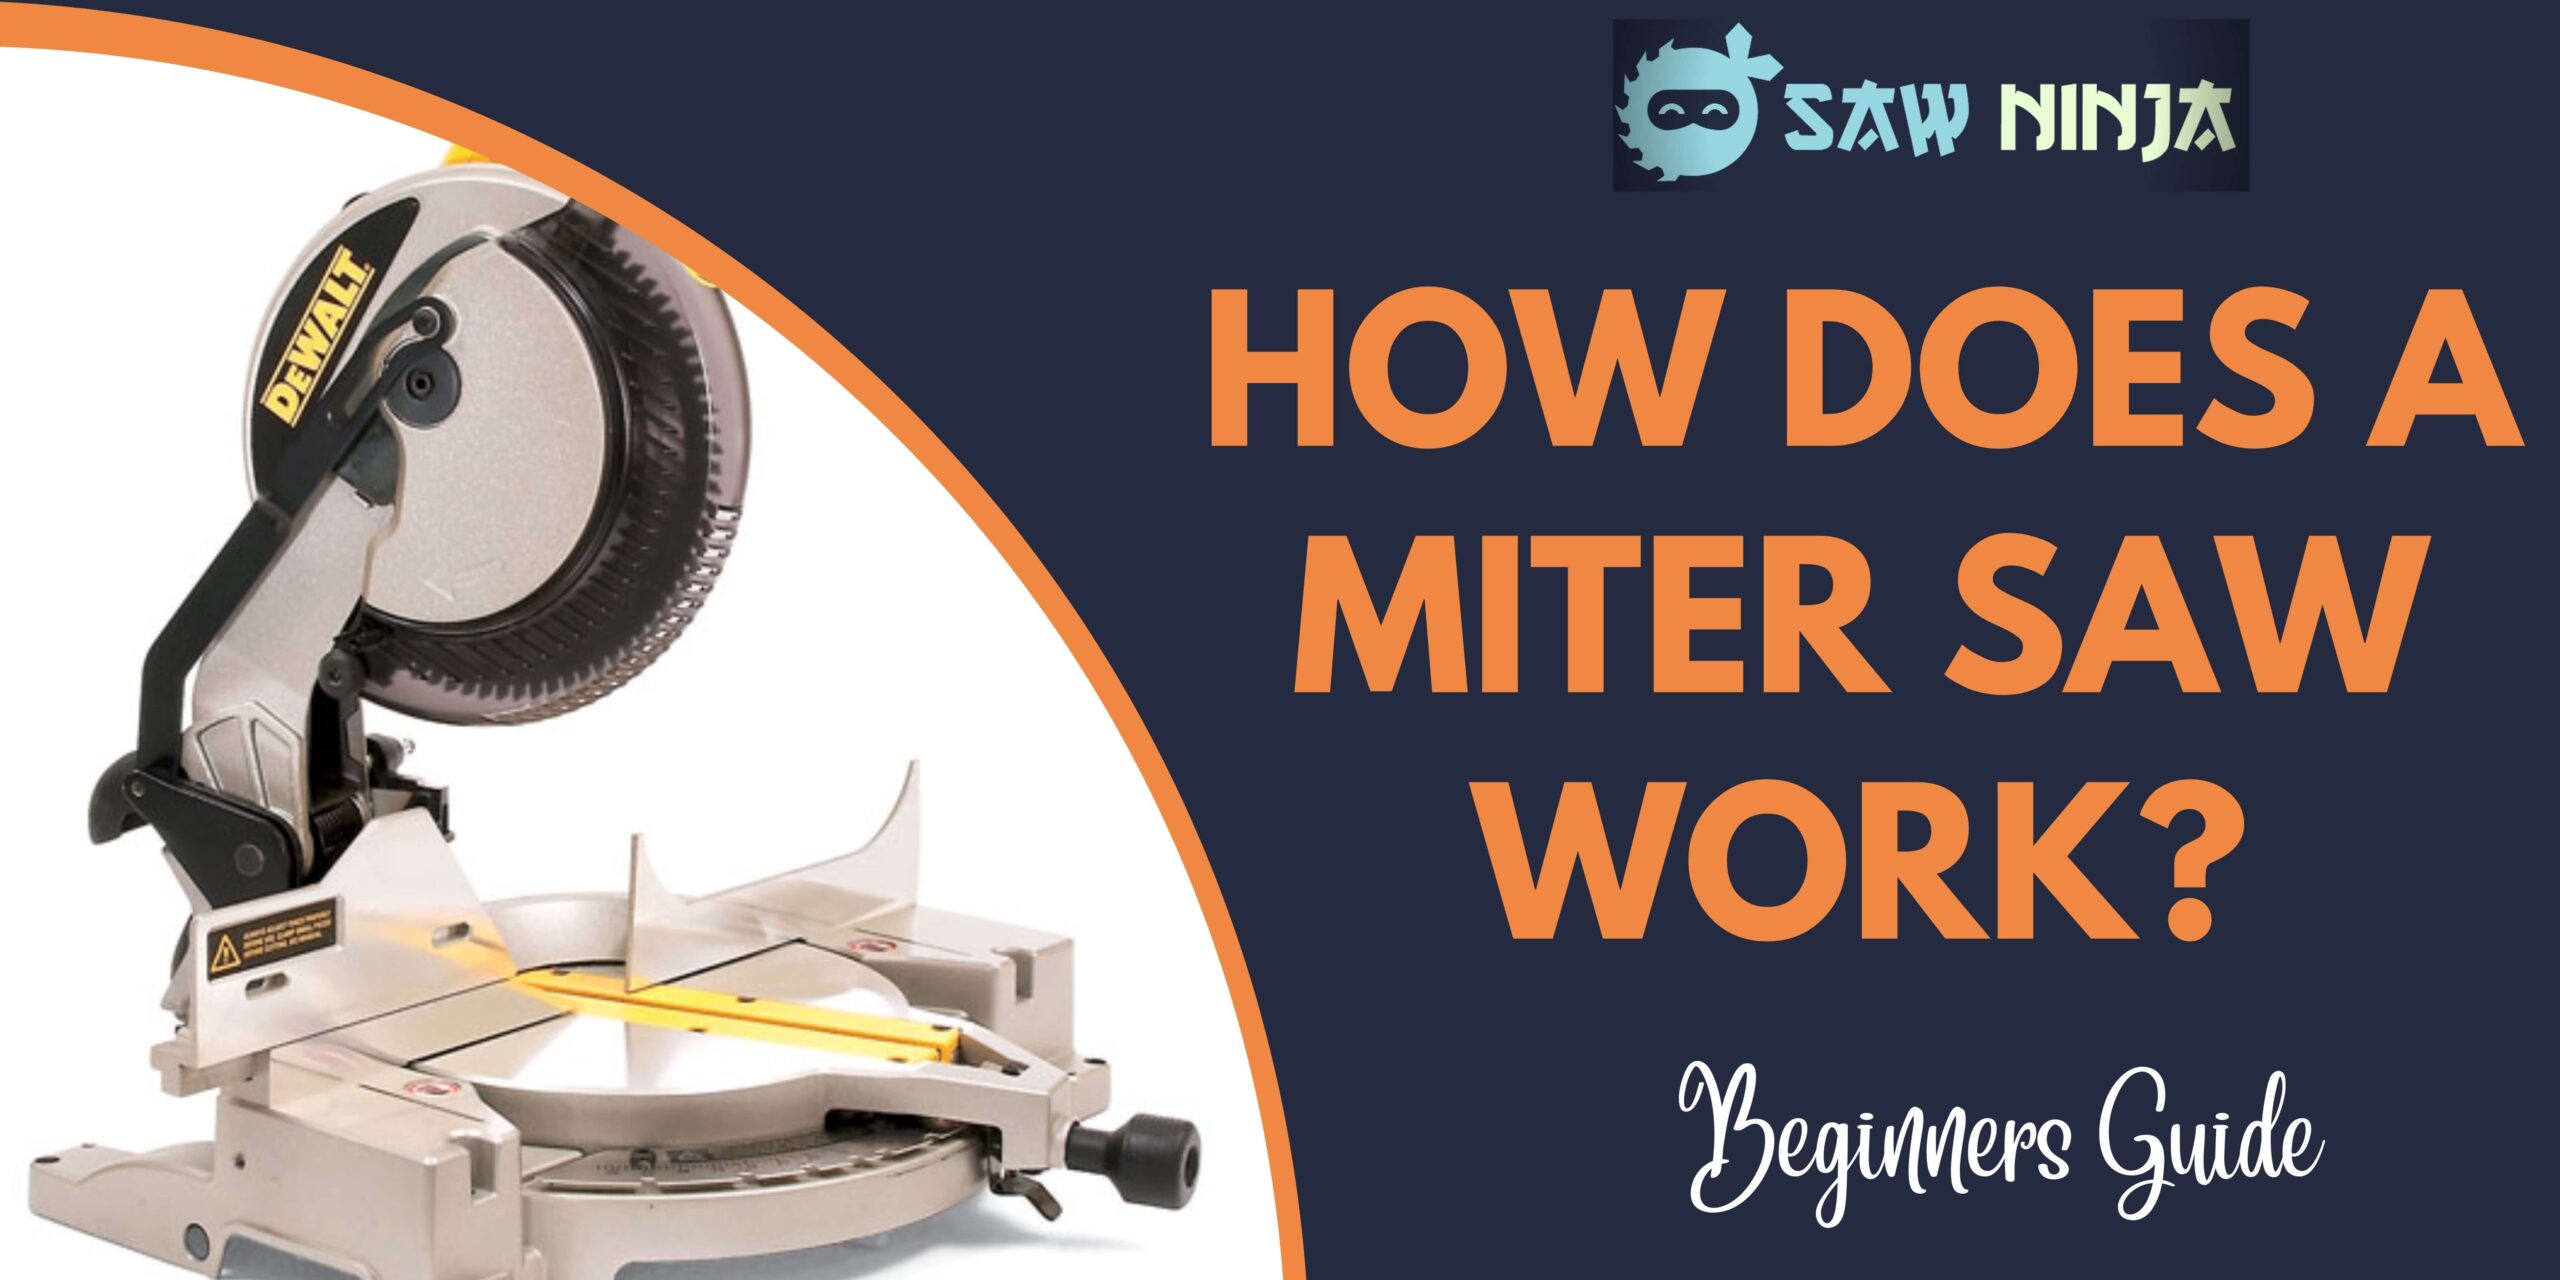 How Does a Miter Saw Work